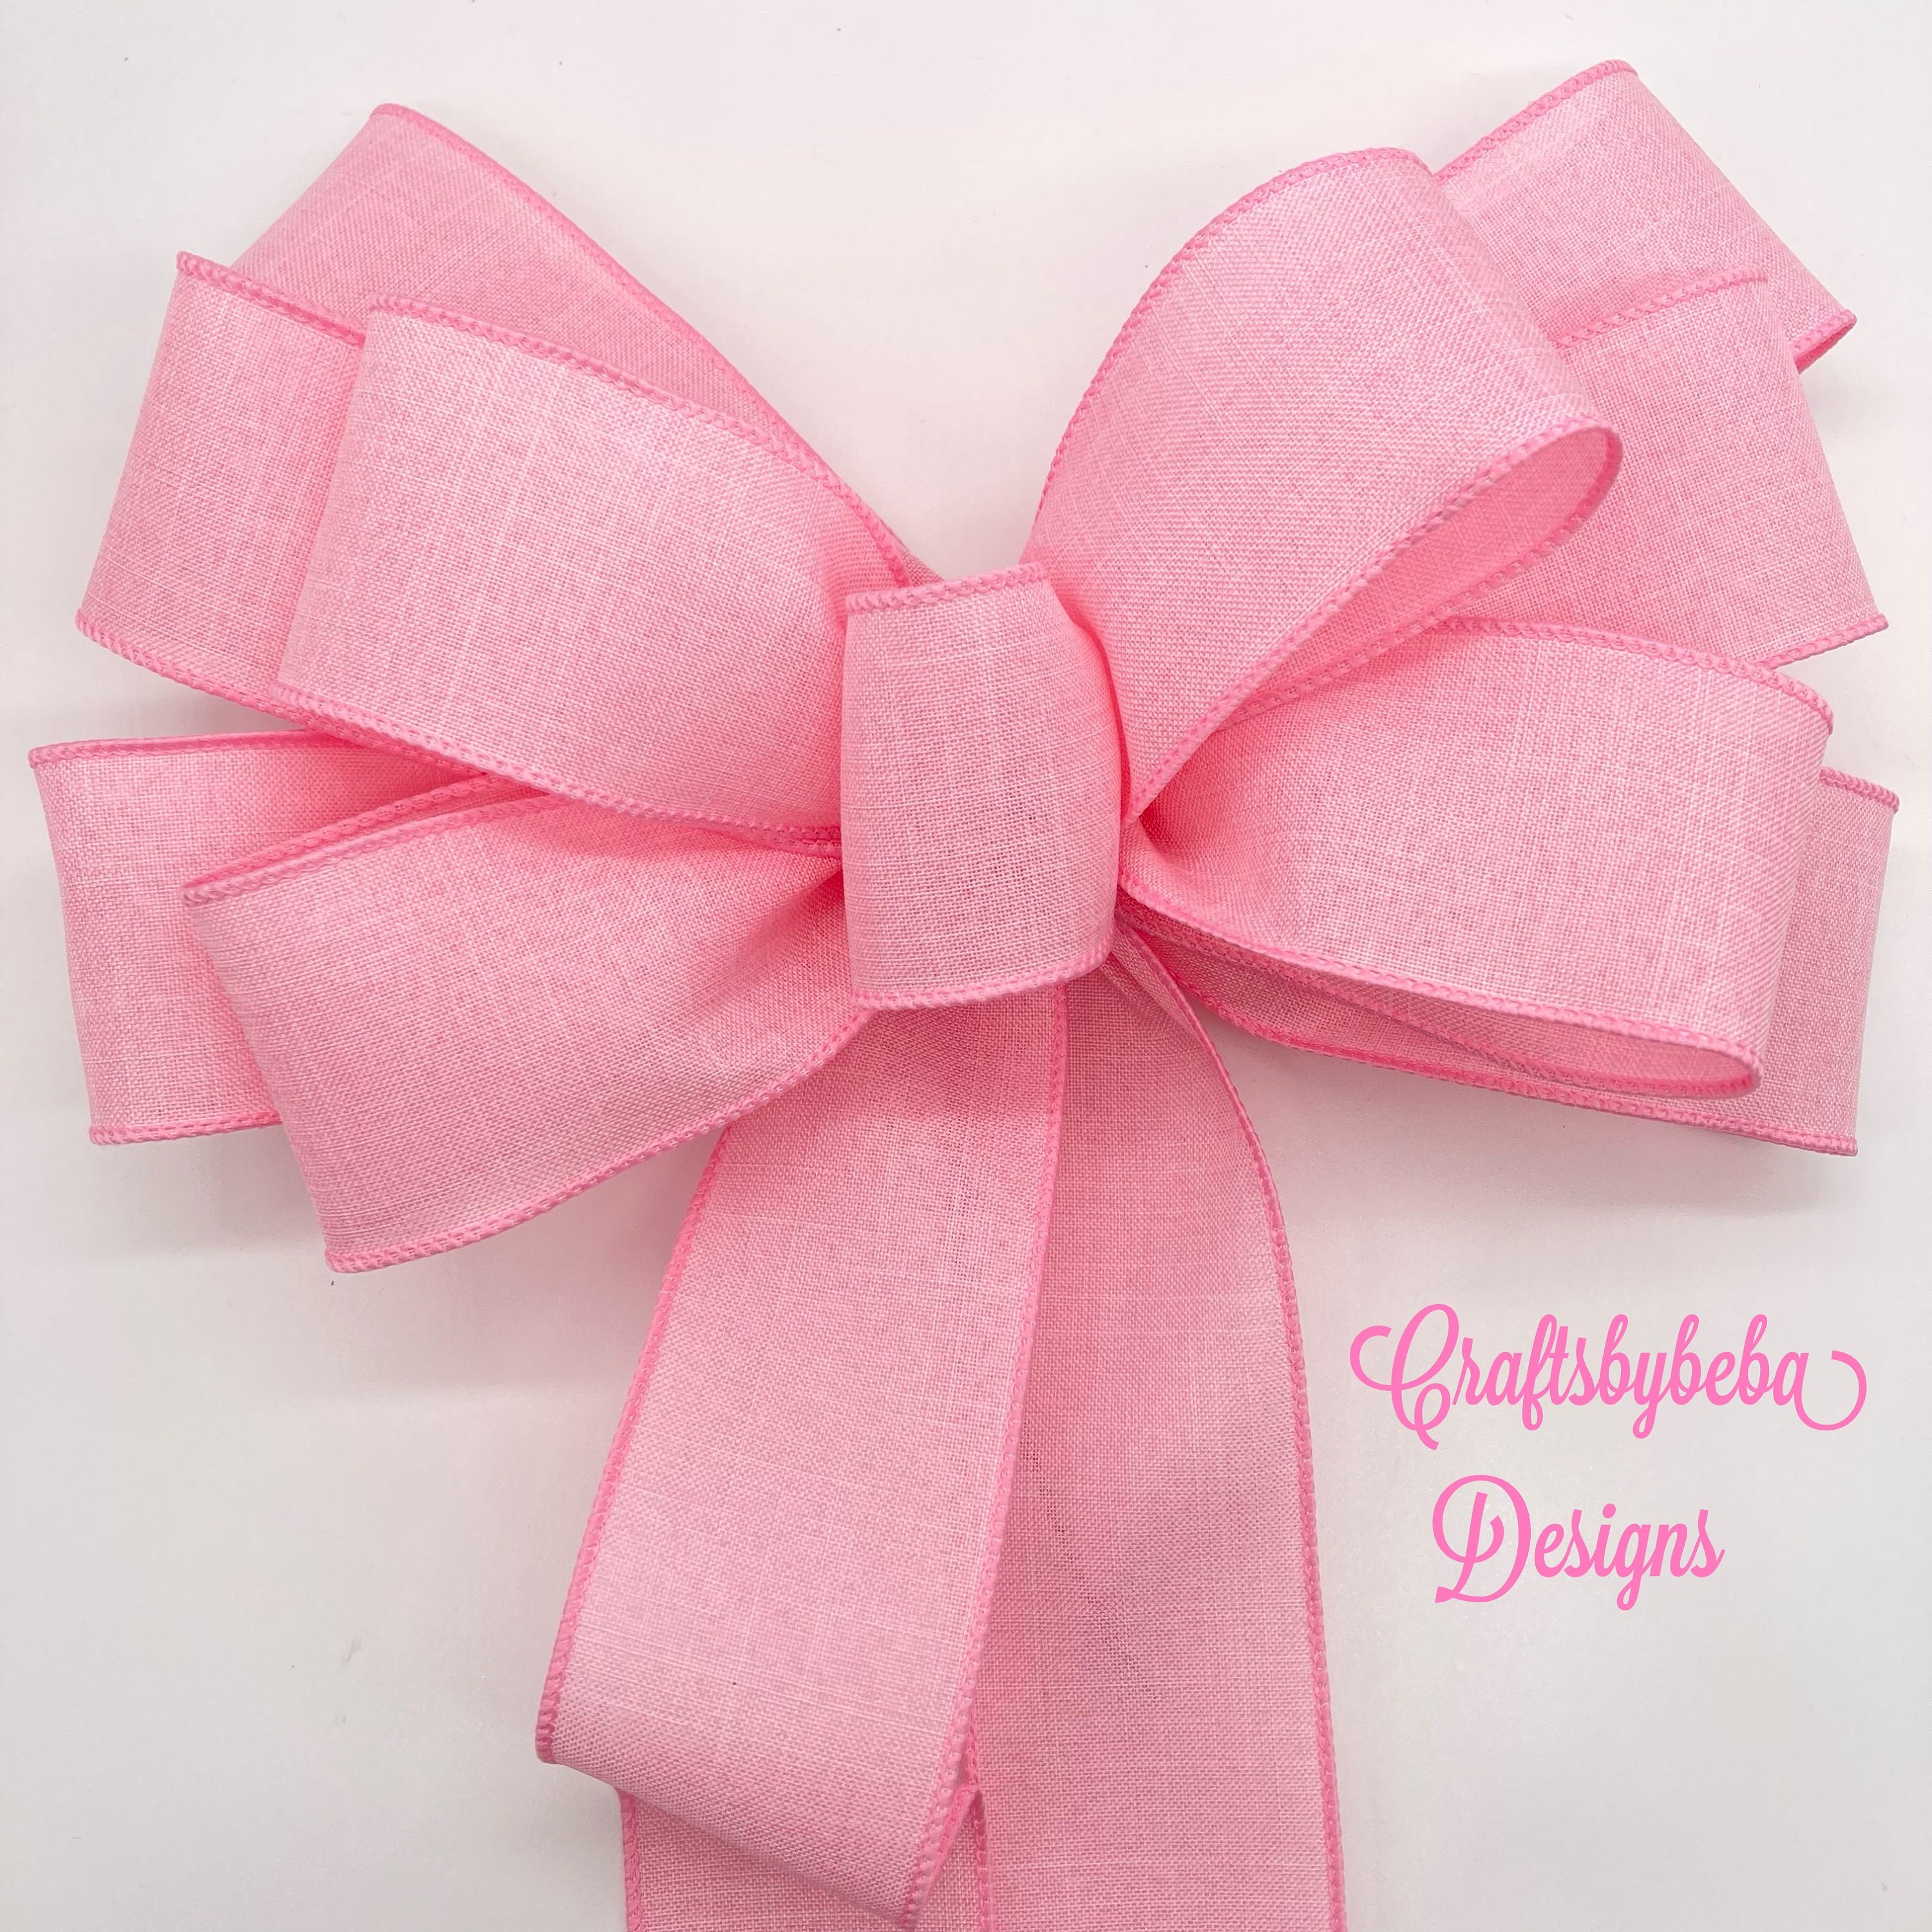 Pink Decor Bows / Set 6 Bows / Valentine Pink Decor Bows / Valentine Light  Pink Decorative Bows / Pink Bows / Baby Girl Baby Shower Bows 